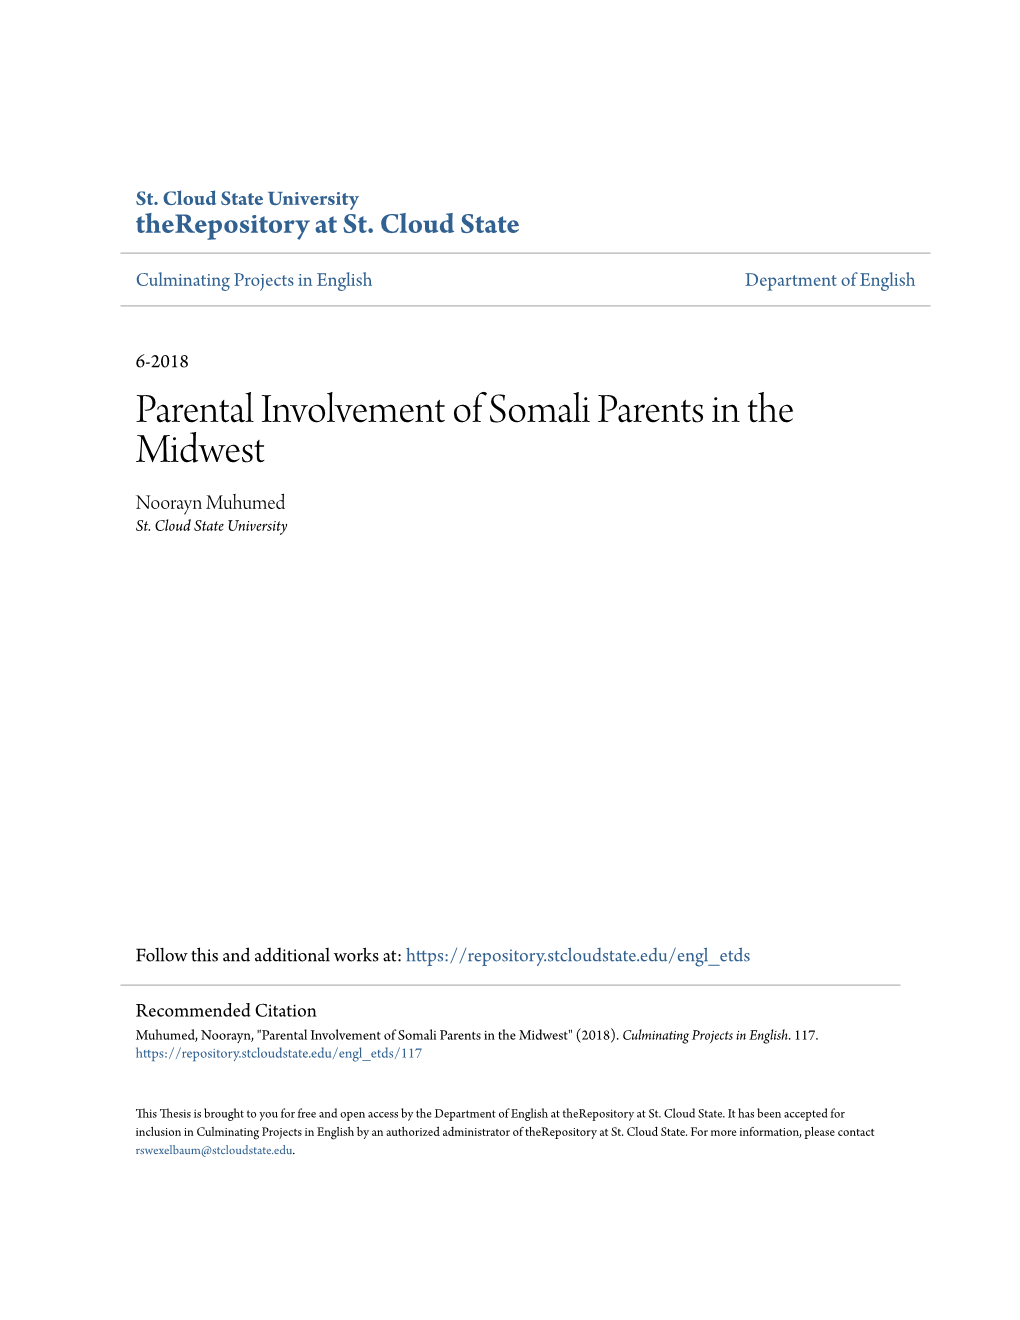 Parental Involvement of Somali Parents in the Midwest Noorayn Muhumed St